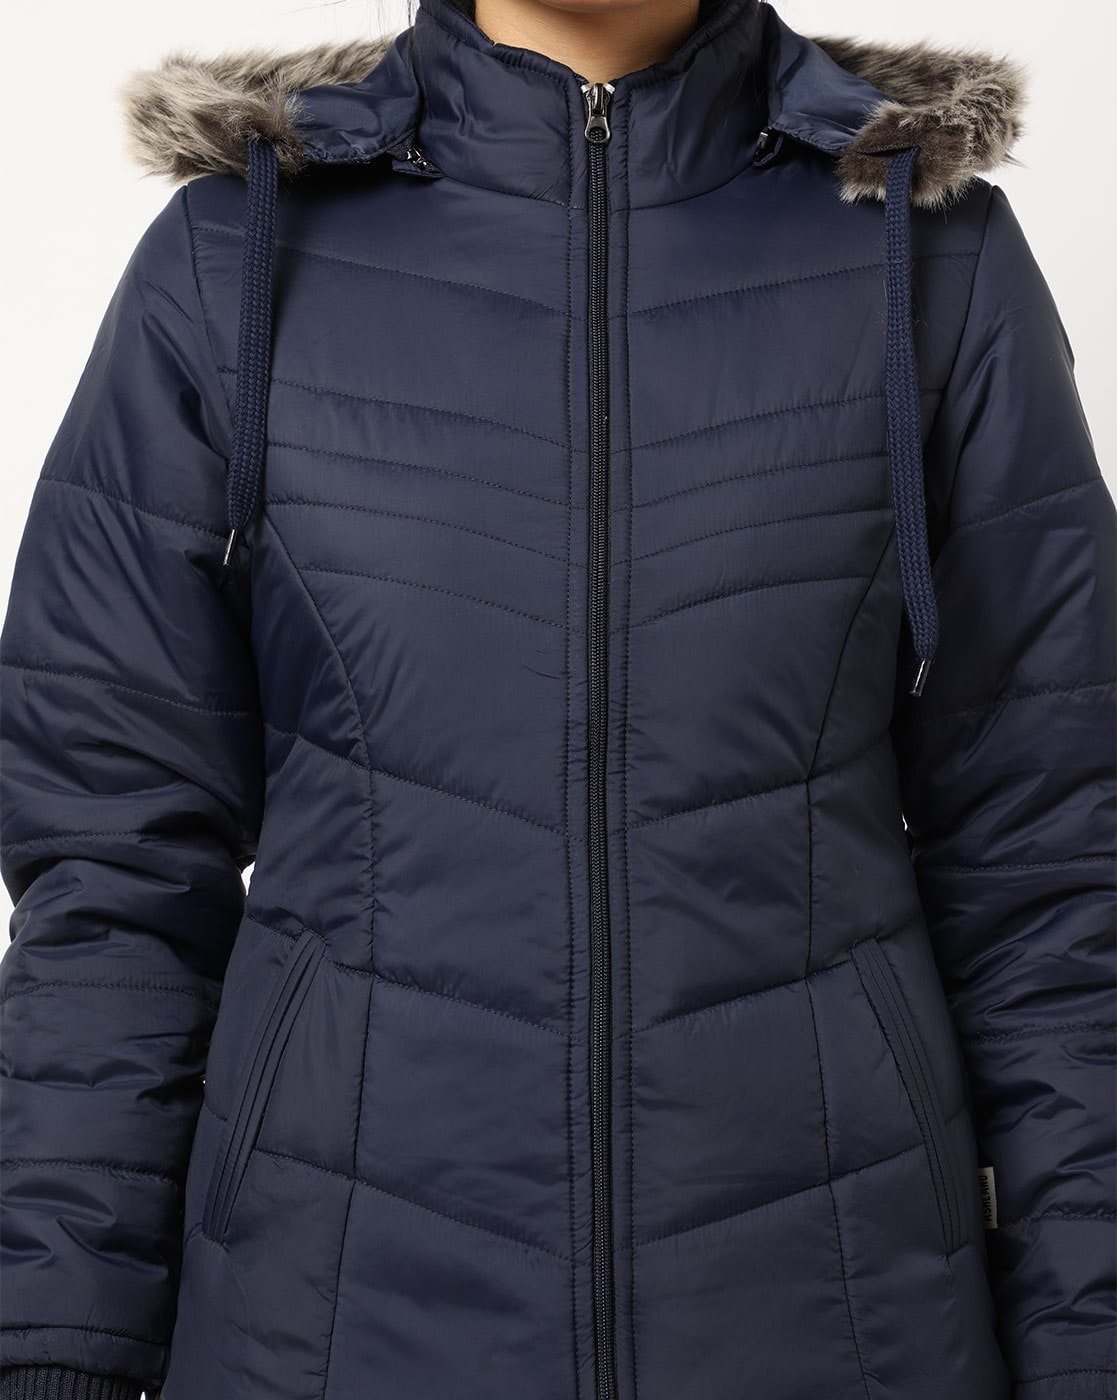 Winter Jackets For Womens Online